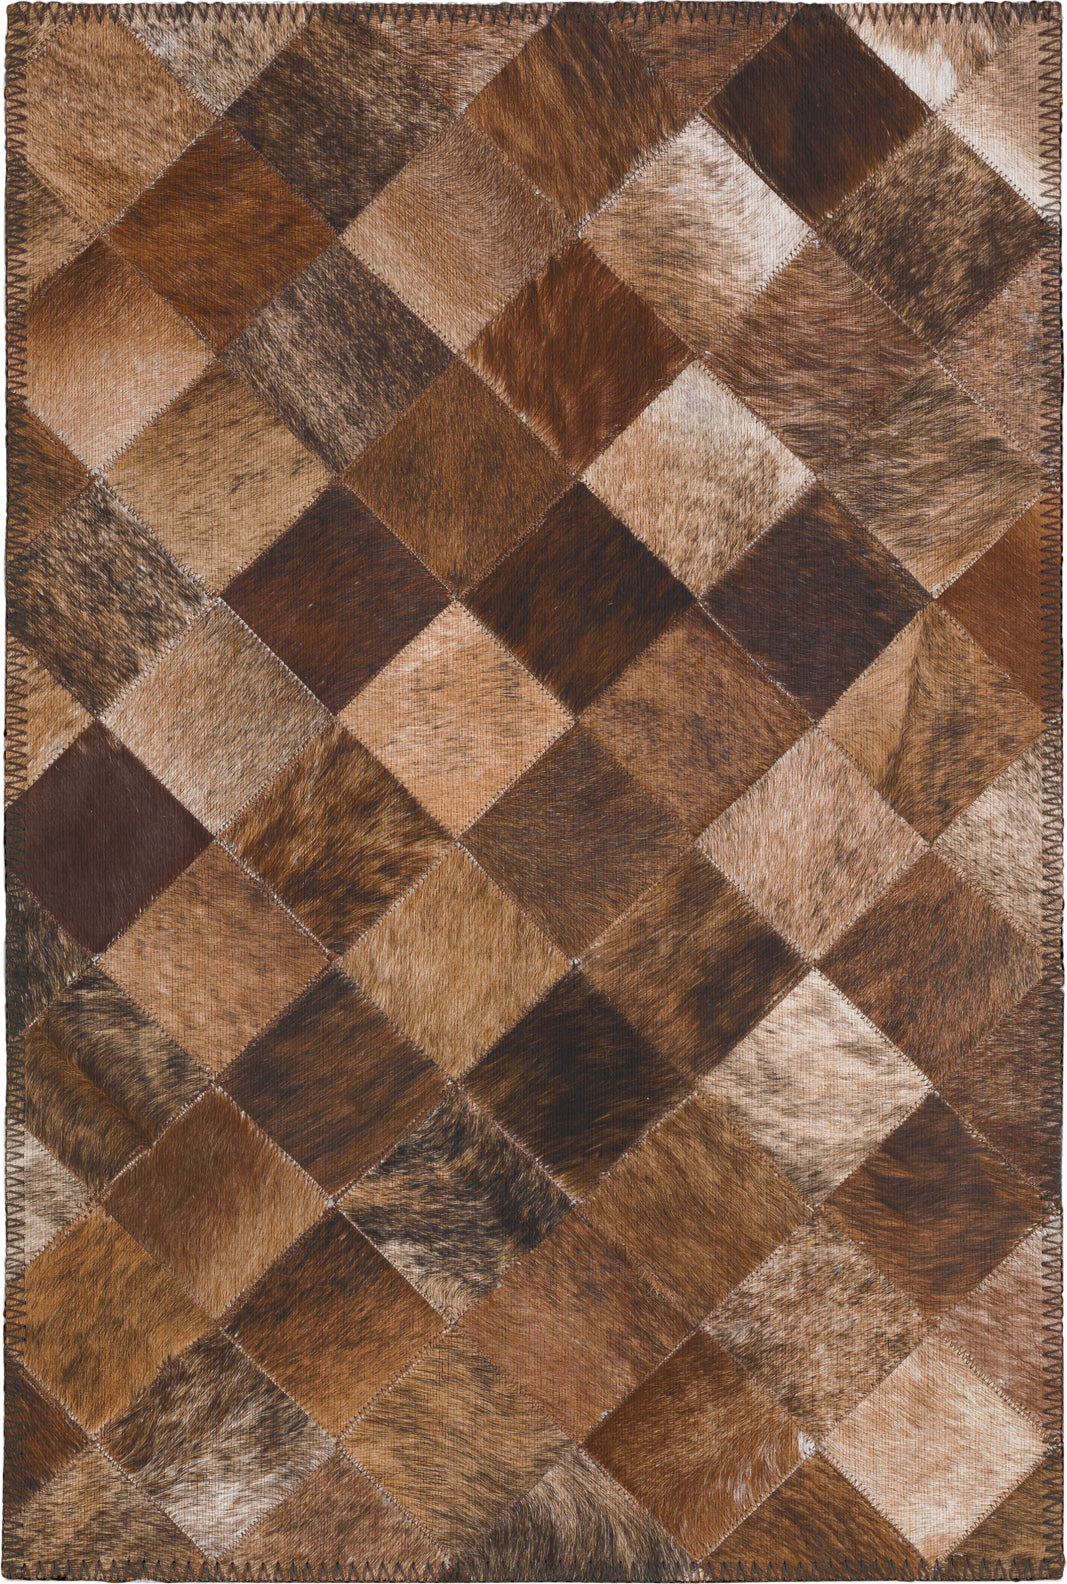 Dalyn Stetson SS2 Bison Area Rug main image